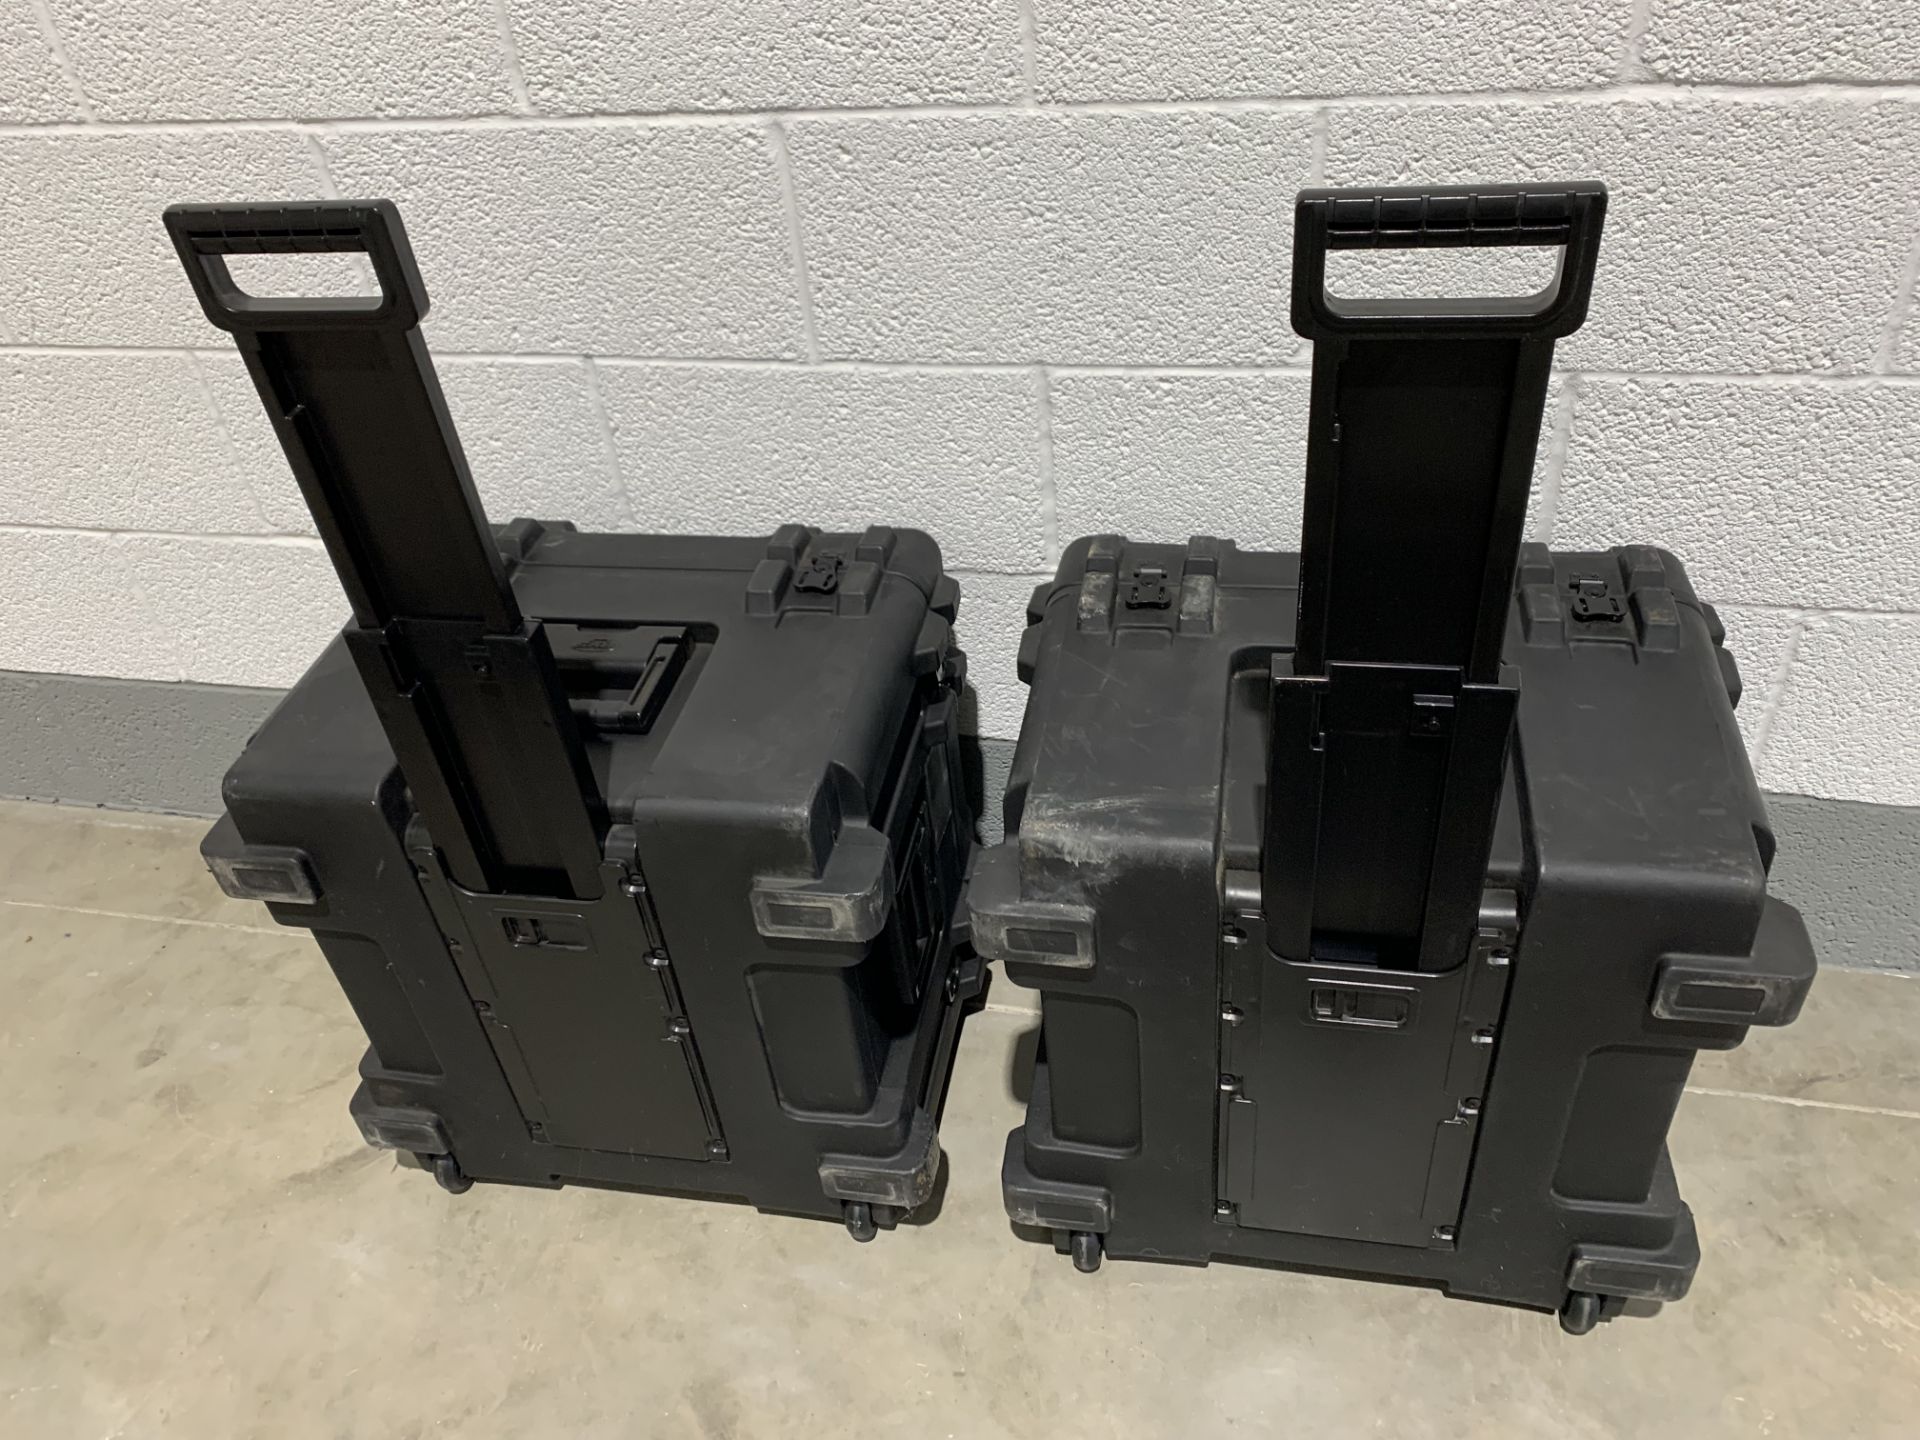 2x SKB R Series 1919-14 Waterproof Utility Case Roto Moulded Condition: Ex-Hire Solid cases. With - Image 4 of 4